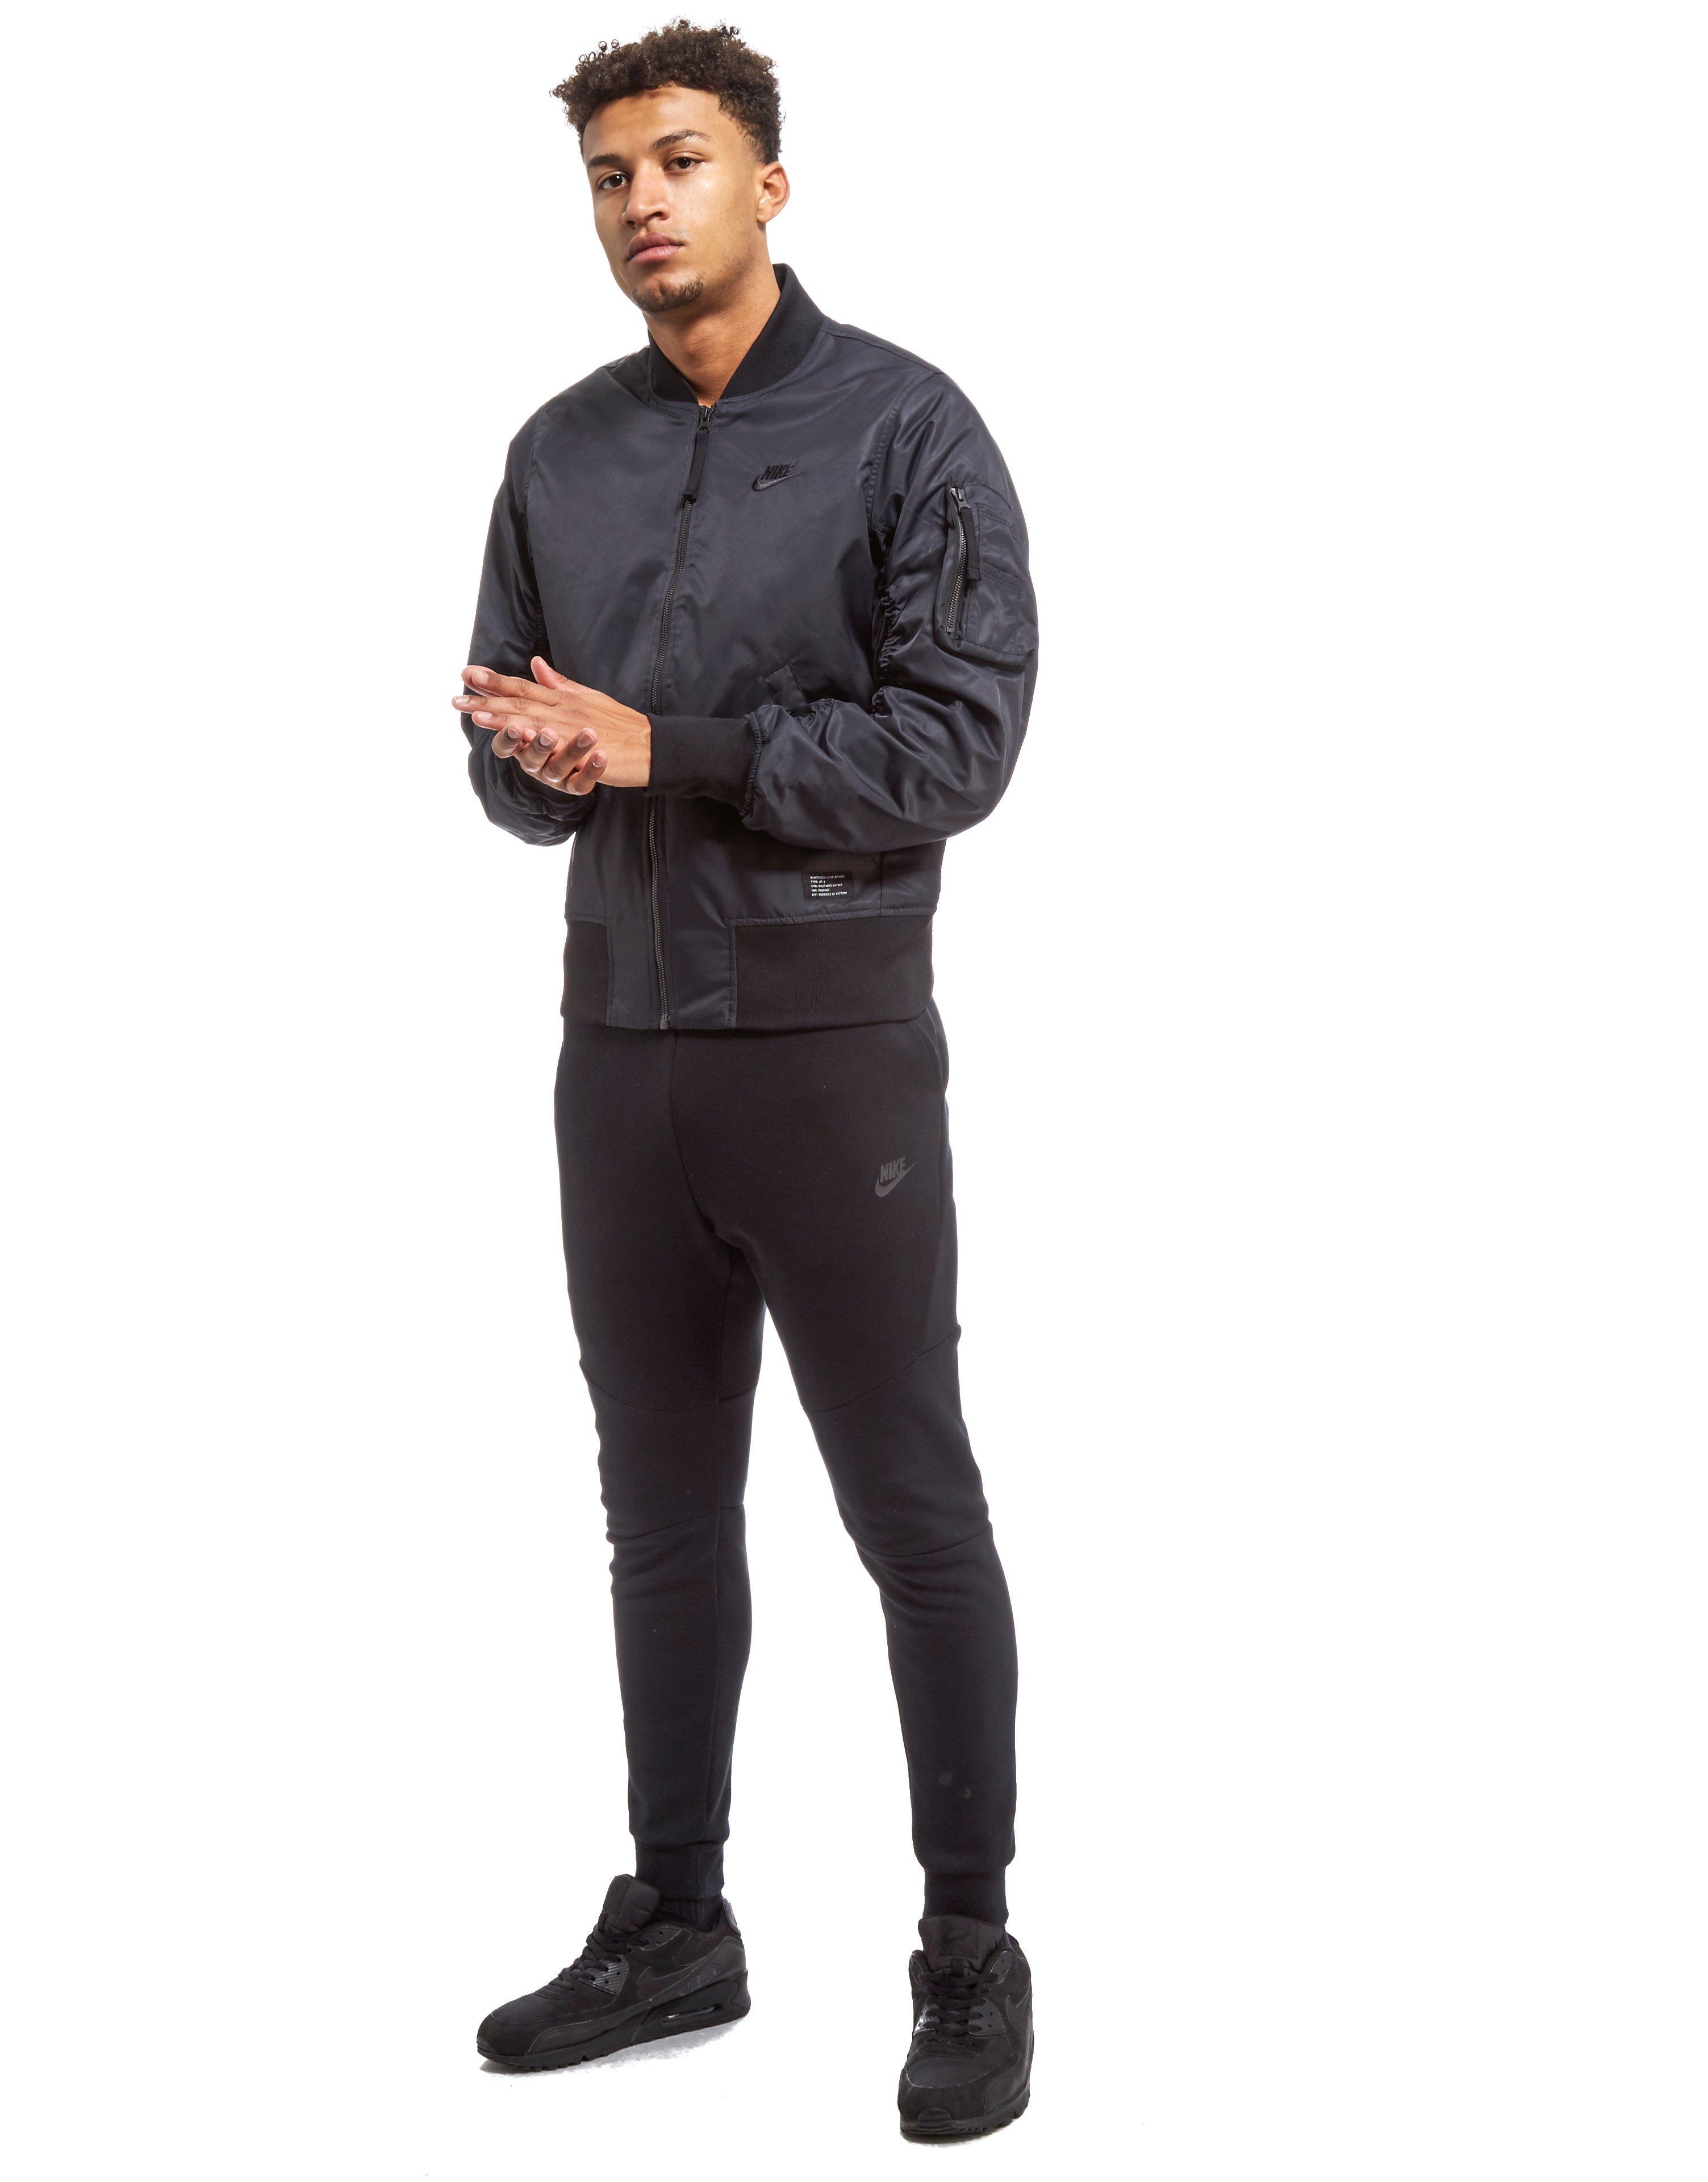 black air force 1 outfit mens